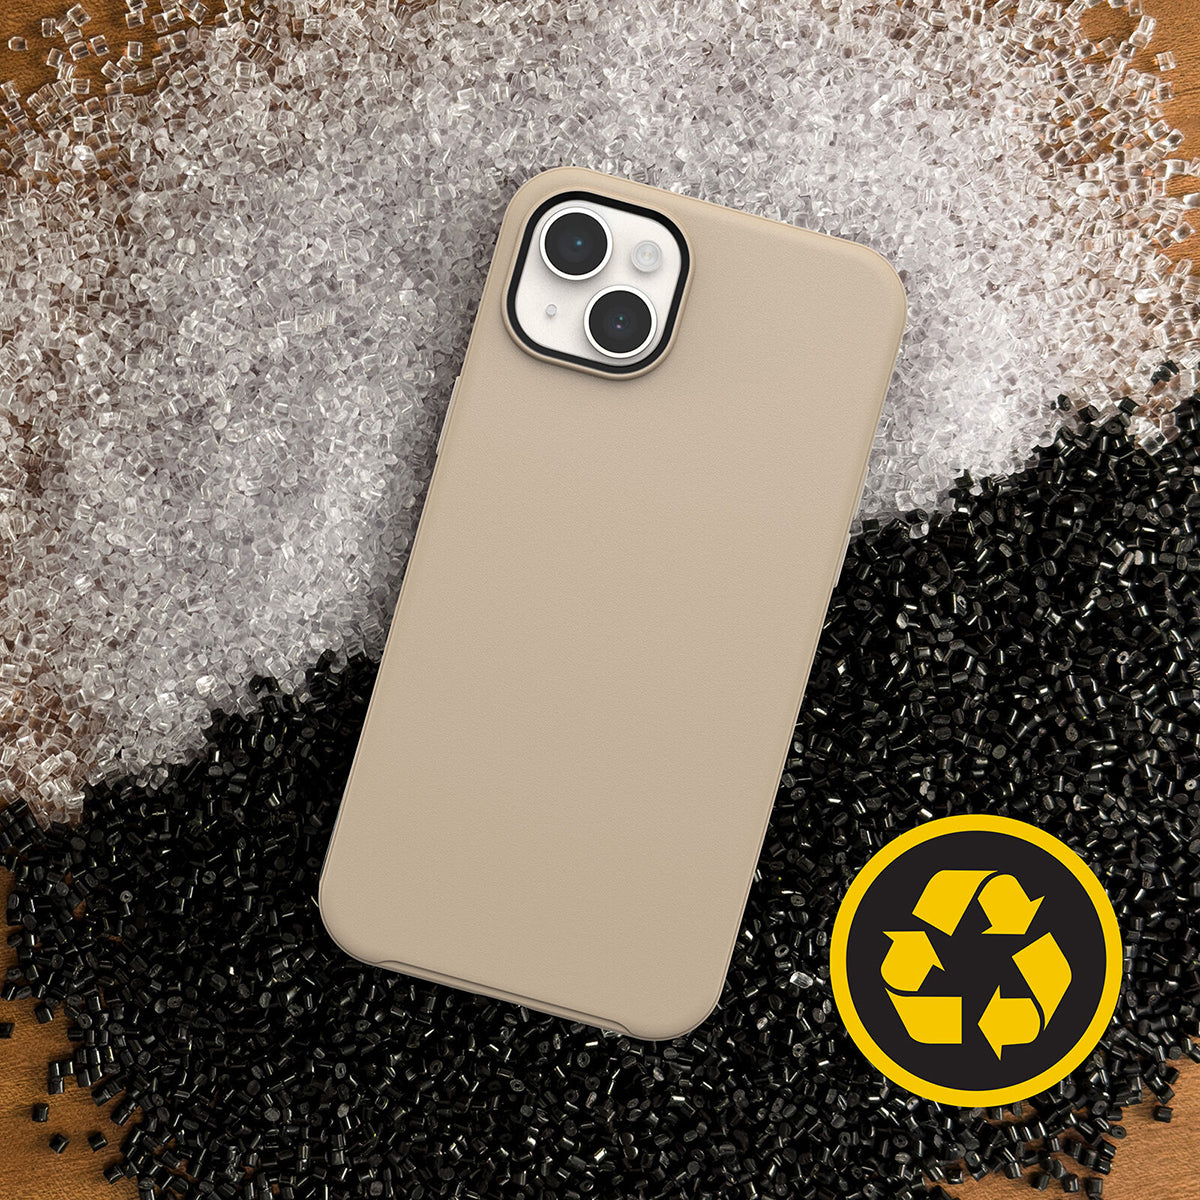 Otterbox Symmetry Phone Case for iPhone 14 Plus.